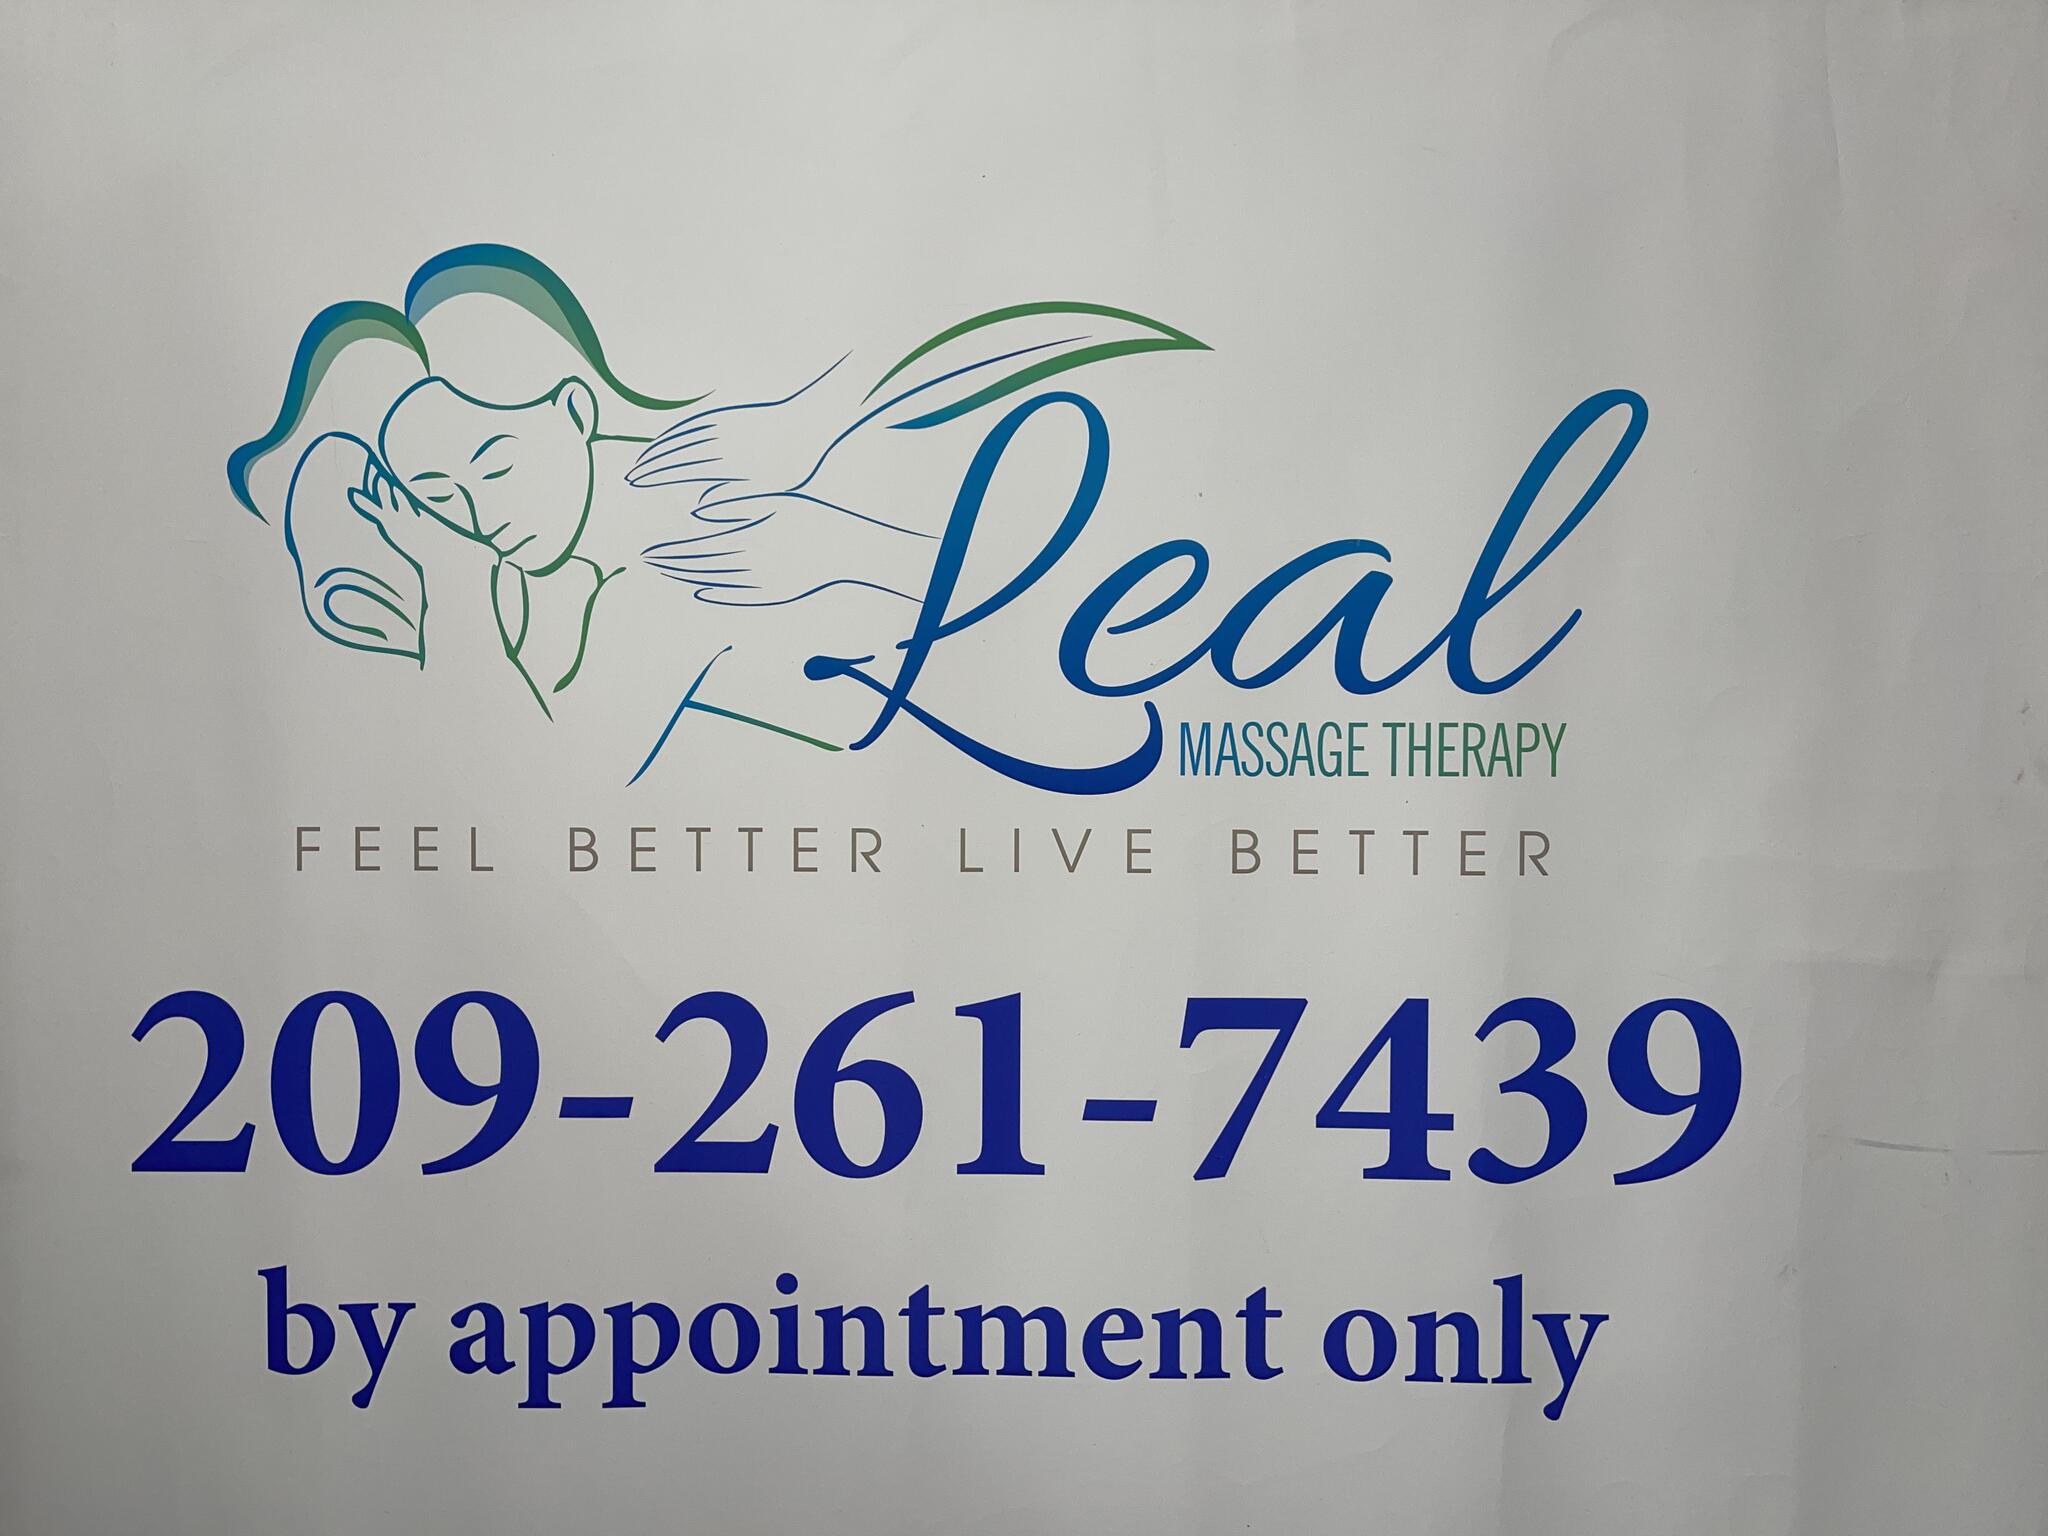 Leal massage therapy